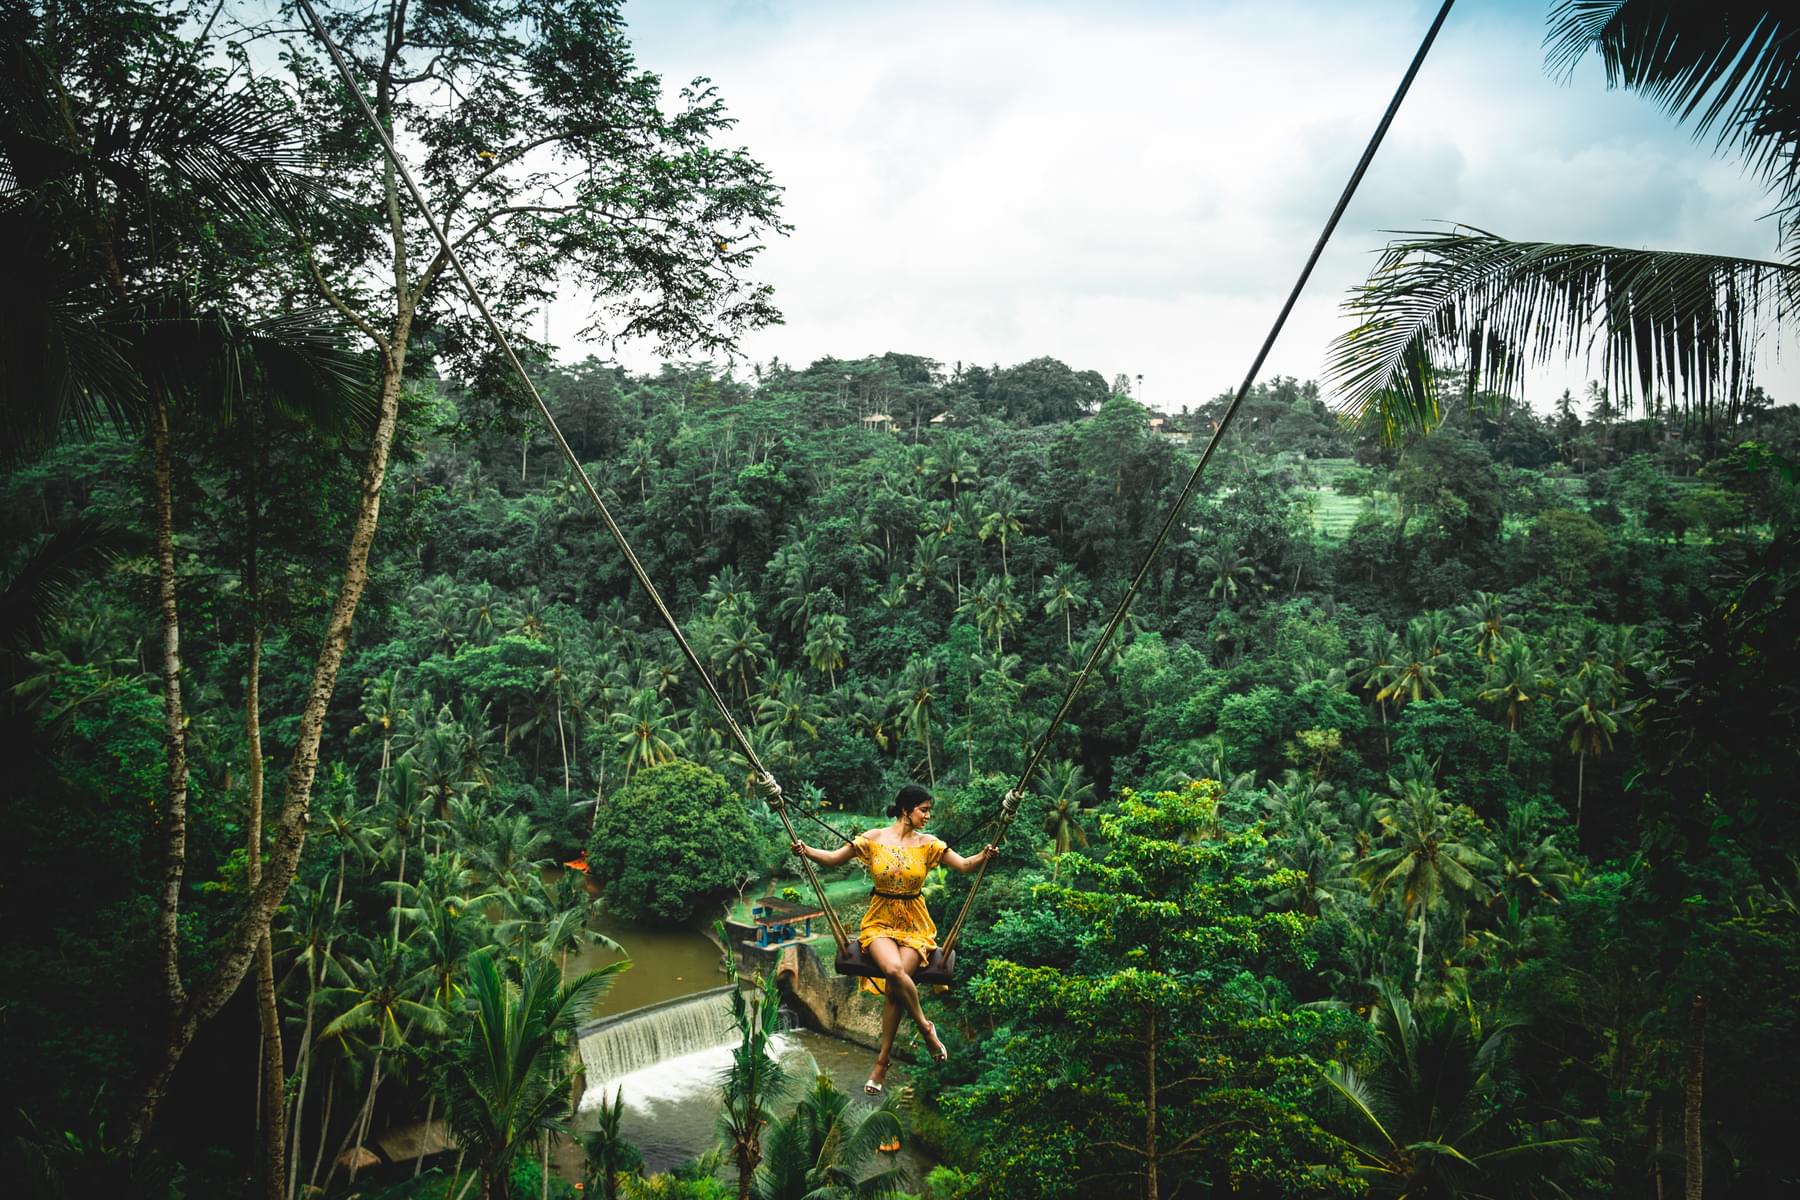 Tips and Precautions to Visit Bali Swing